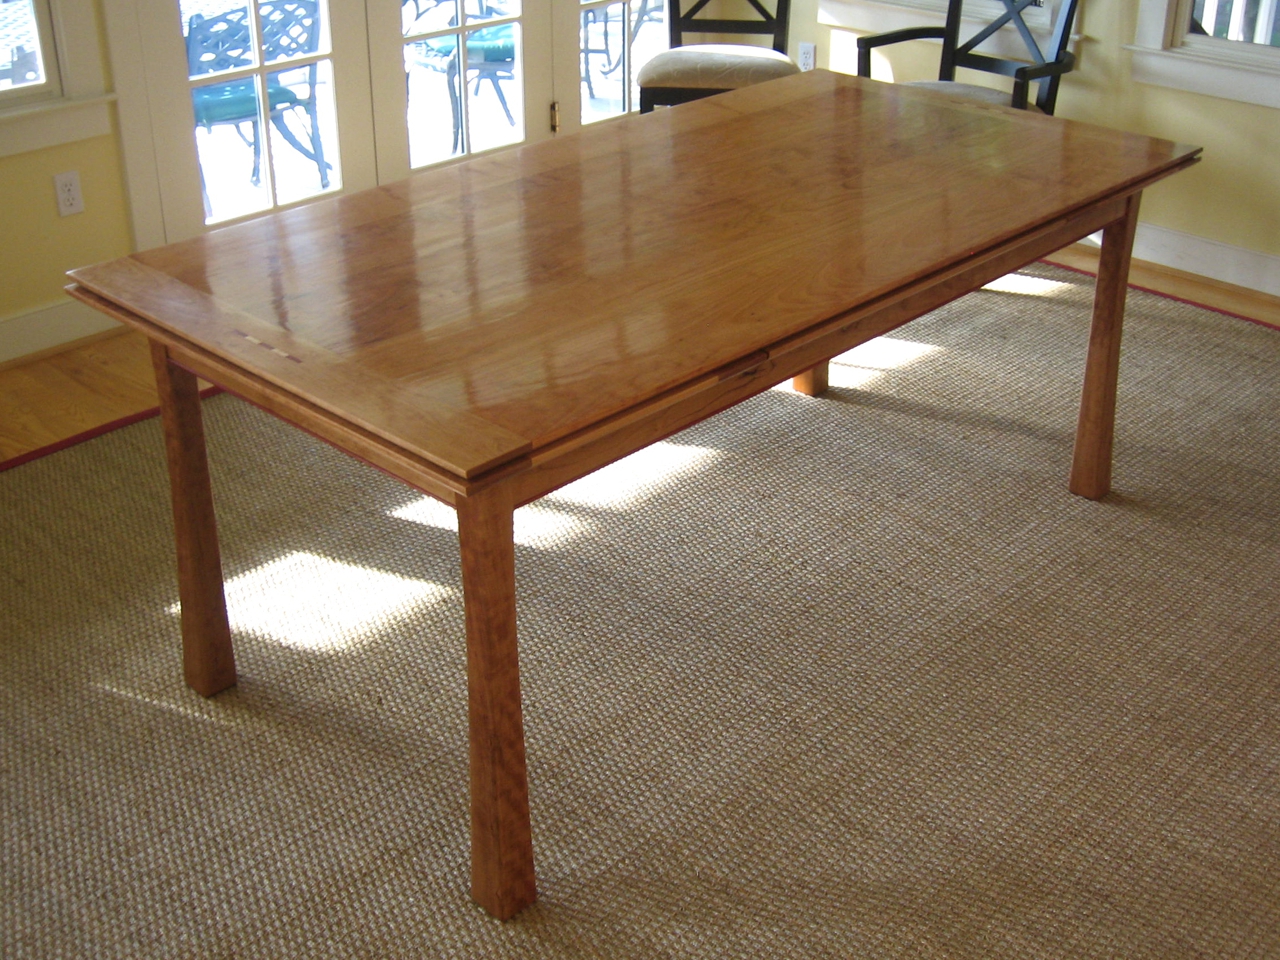 7s0qr9eRK7siF5rMoMHQ_Dutch-Pull-Out-Dining-Table-by-Joseph-Murphy-Furniture-Maker-at-CustomMade.com_.jpg